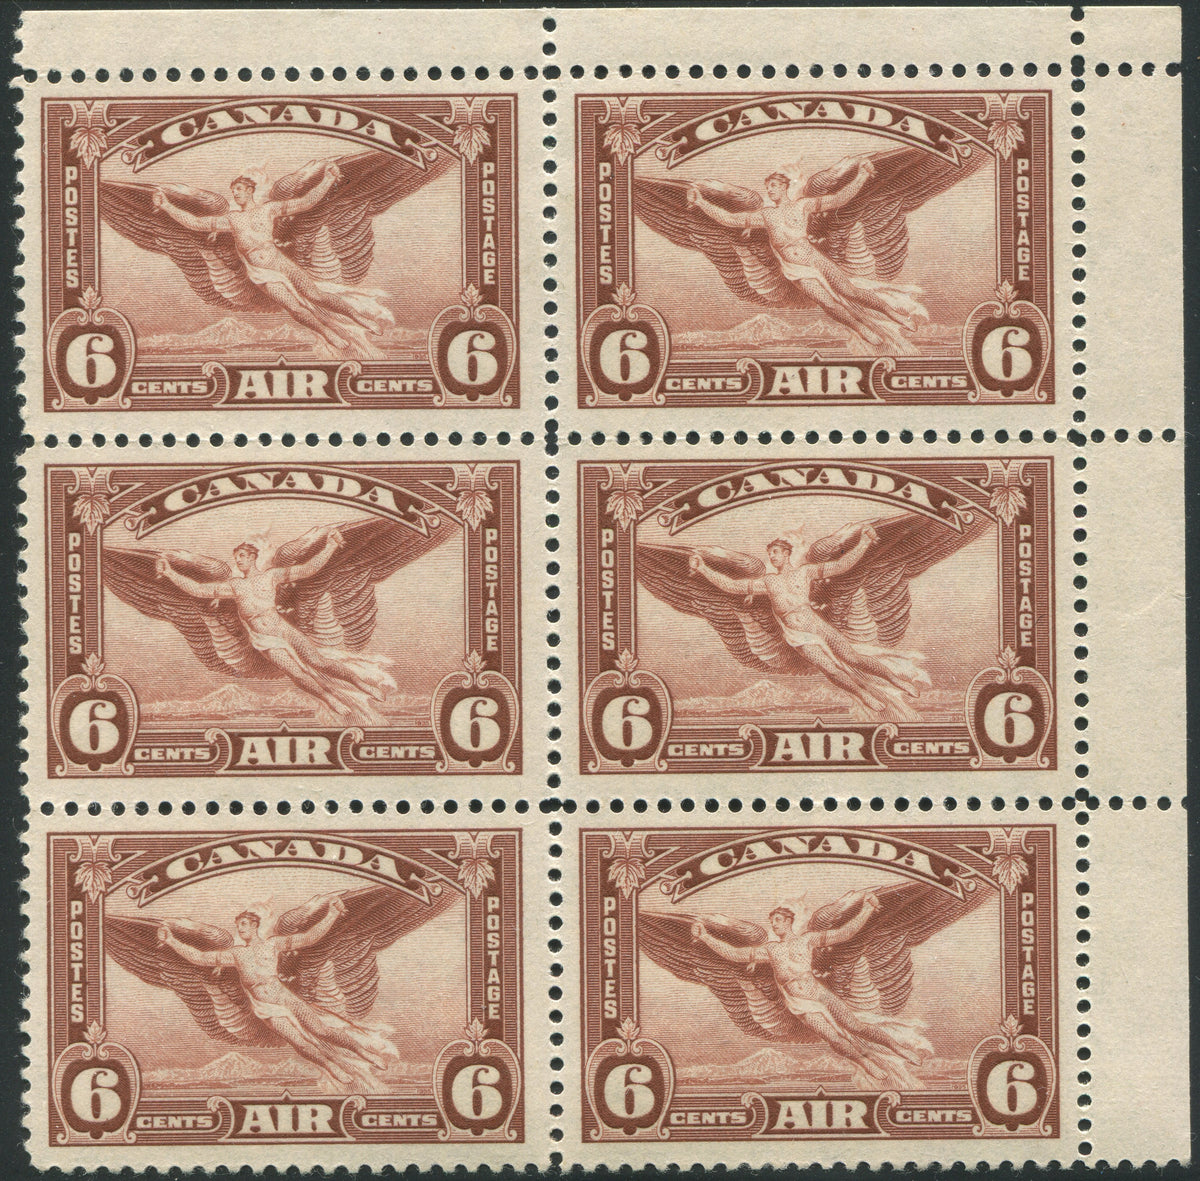 0005CA1909 - Canada C5ii - Mint Block of 6, &#39;Moulting Wing&#39; Variety